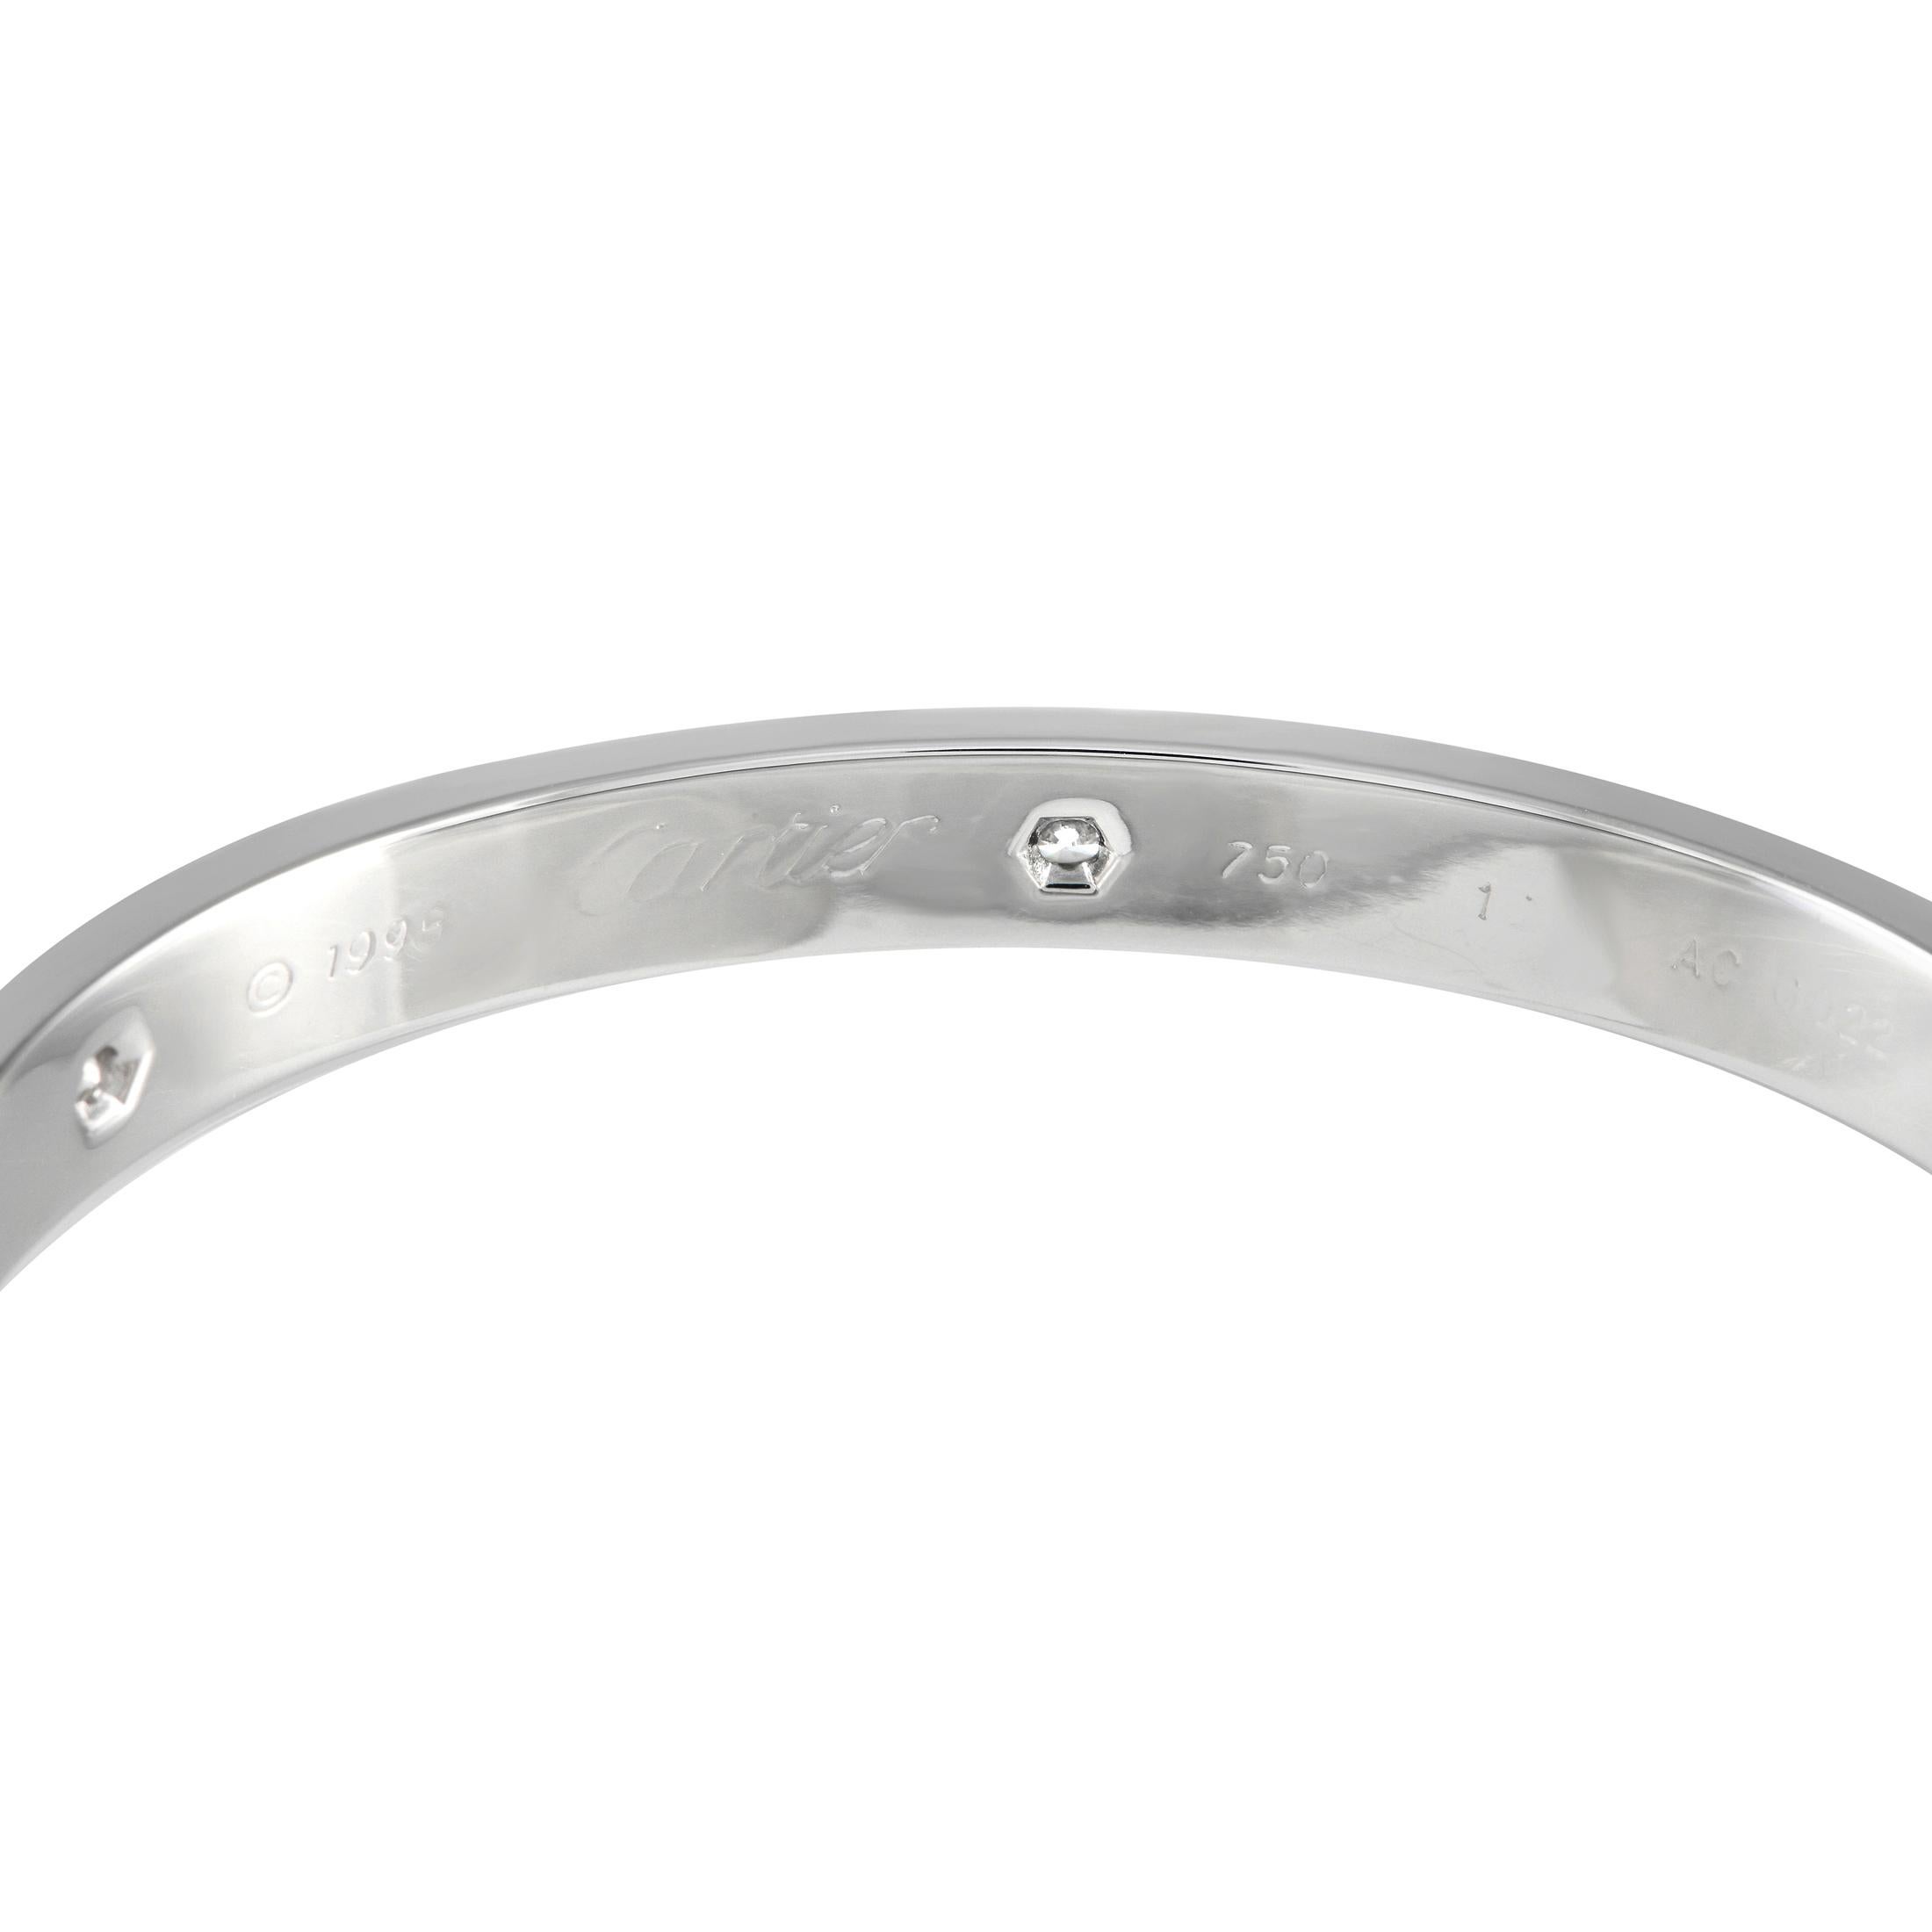 The Cartier Love bracelet - a fine piece of jewelry symbolizing the permanence of true love. This white gold bangle is set with six diamonds laid out alternately with screw motifs. It suits wrists of both men and women and has an classic appeal that